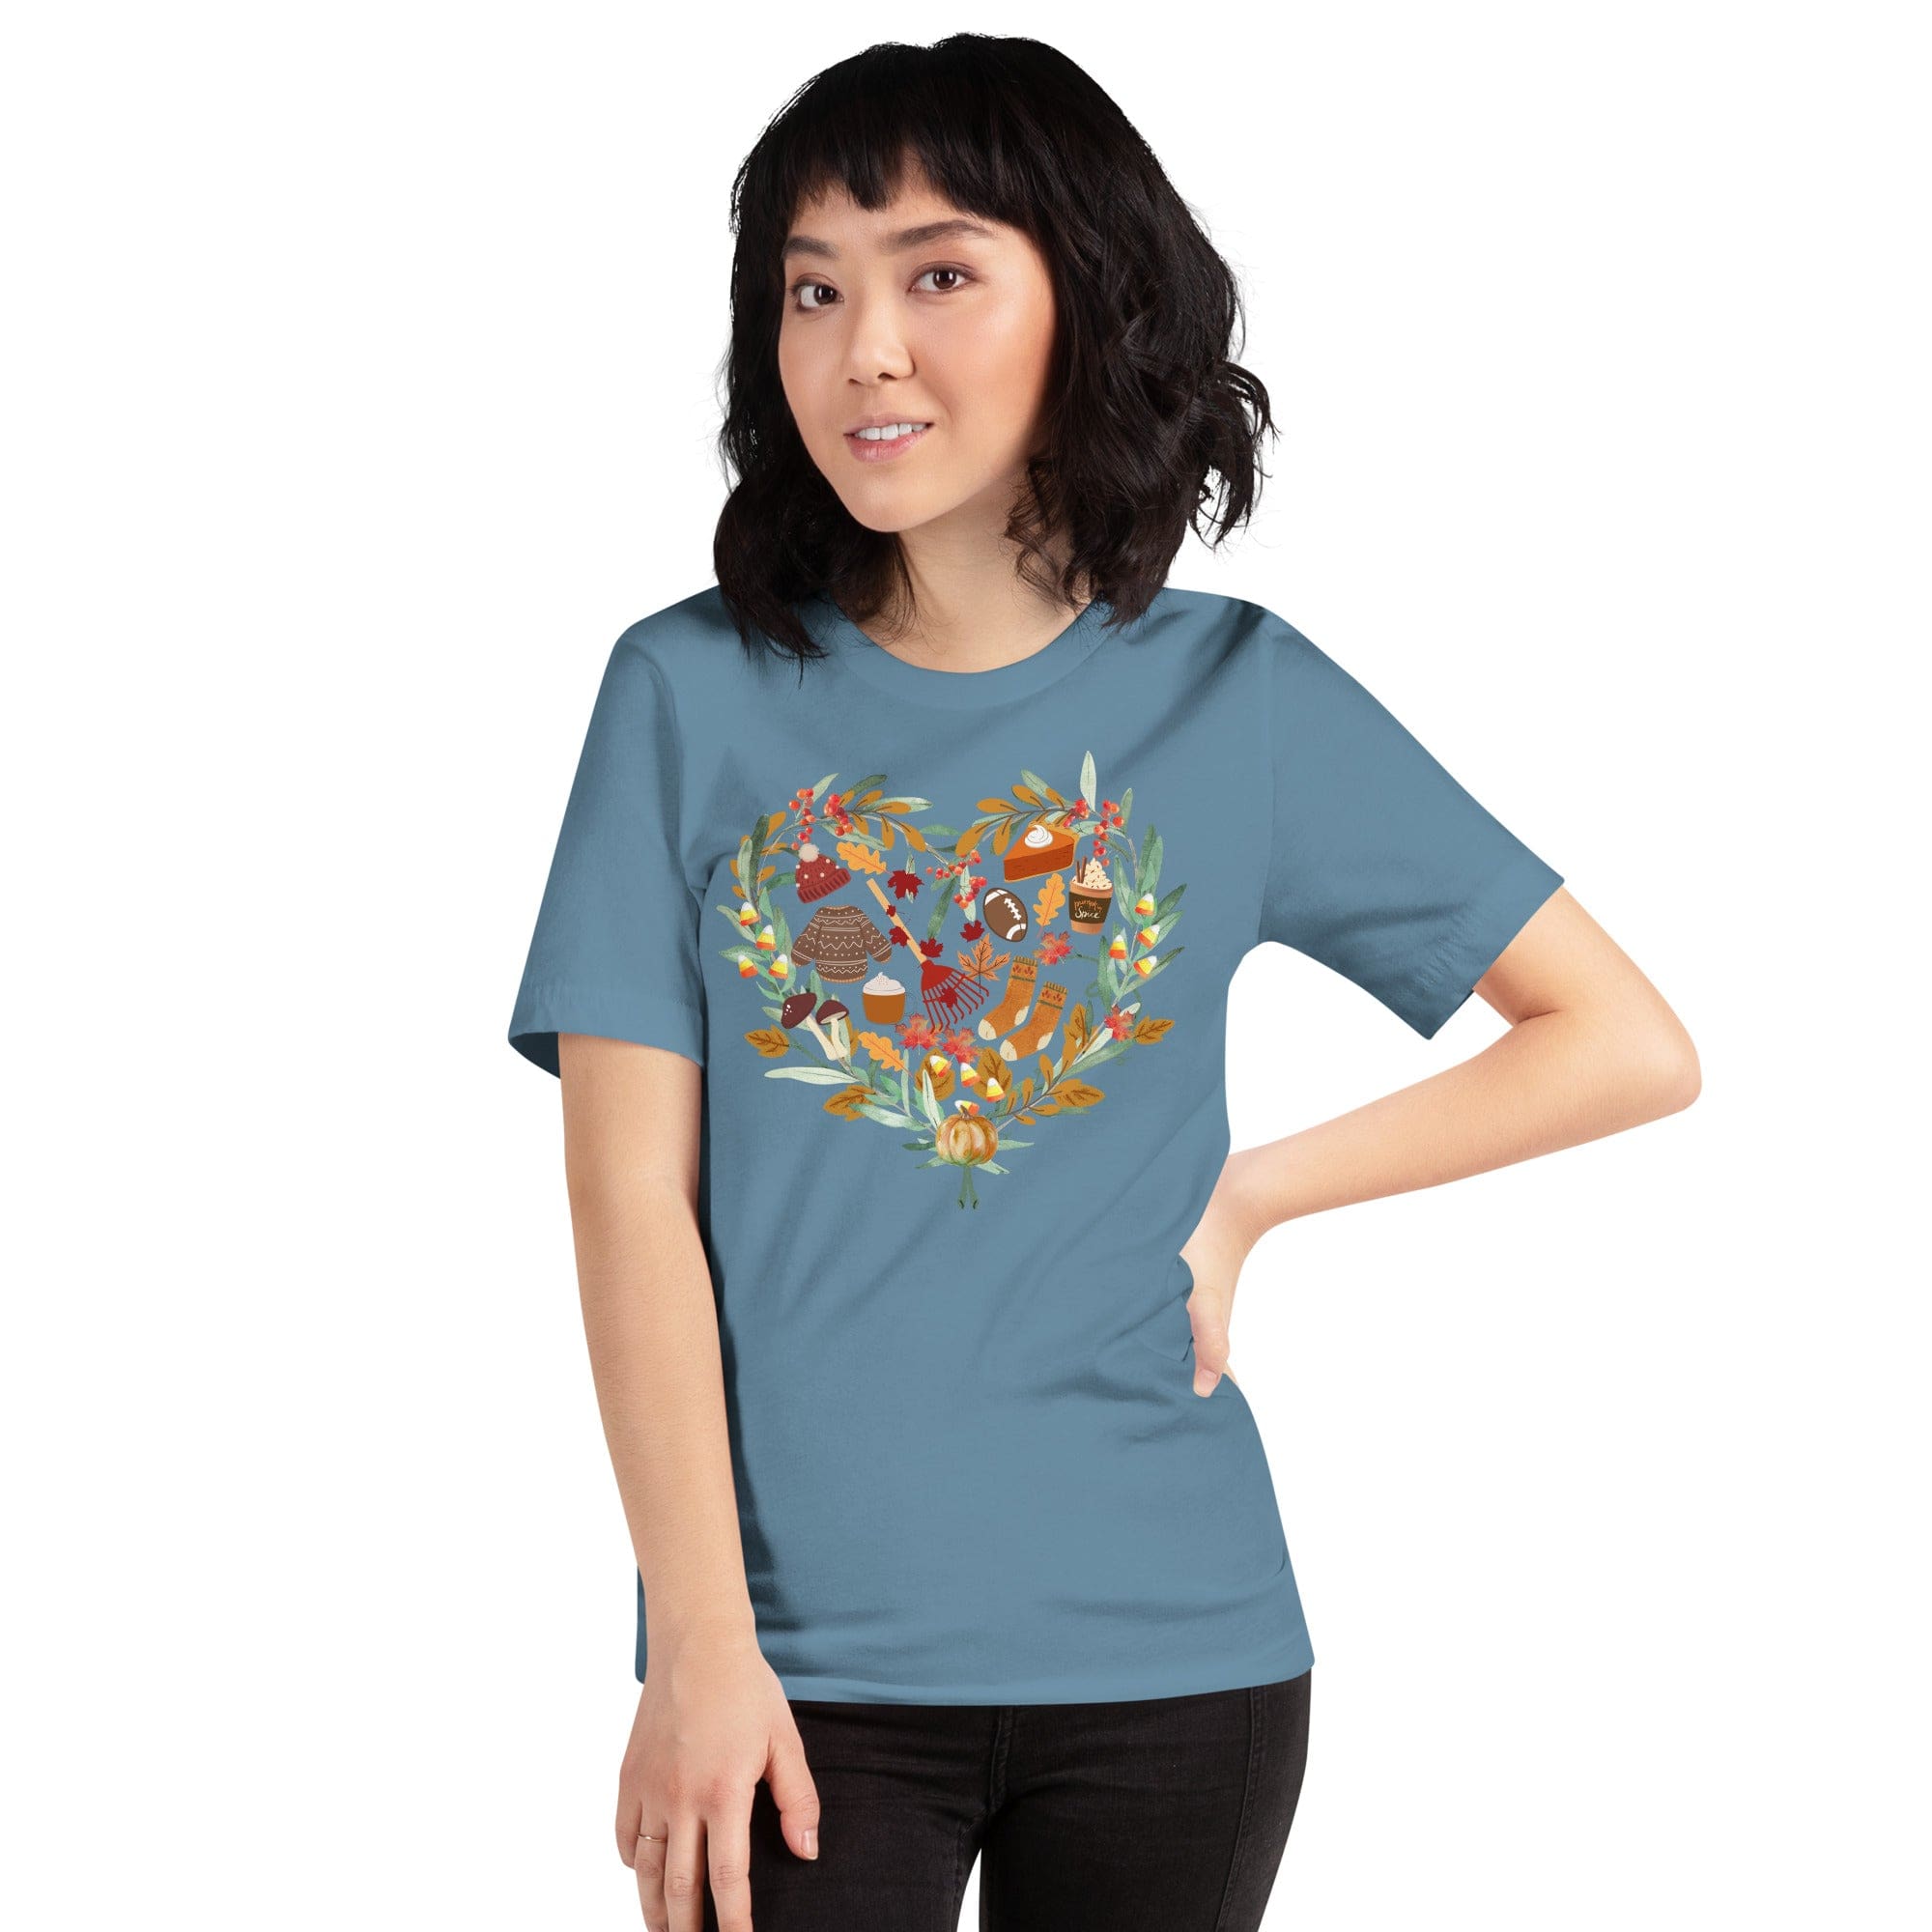 Spruced Roost T-Shirts Steel Blue / S Autumn Medley T-Shirt Crew Neck - XS-3XL